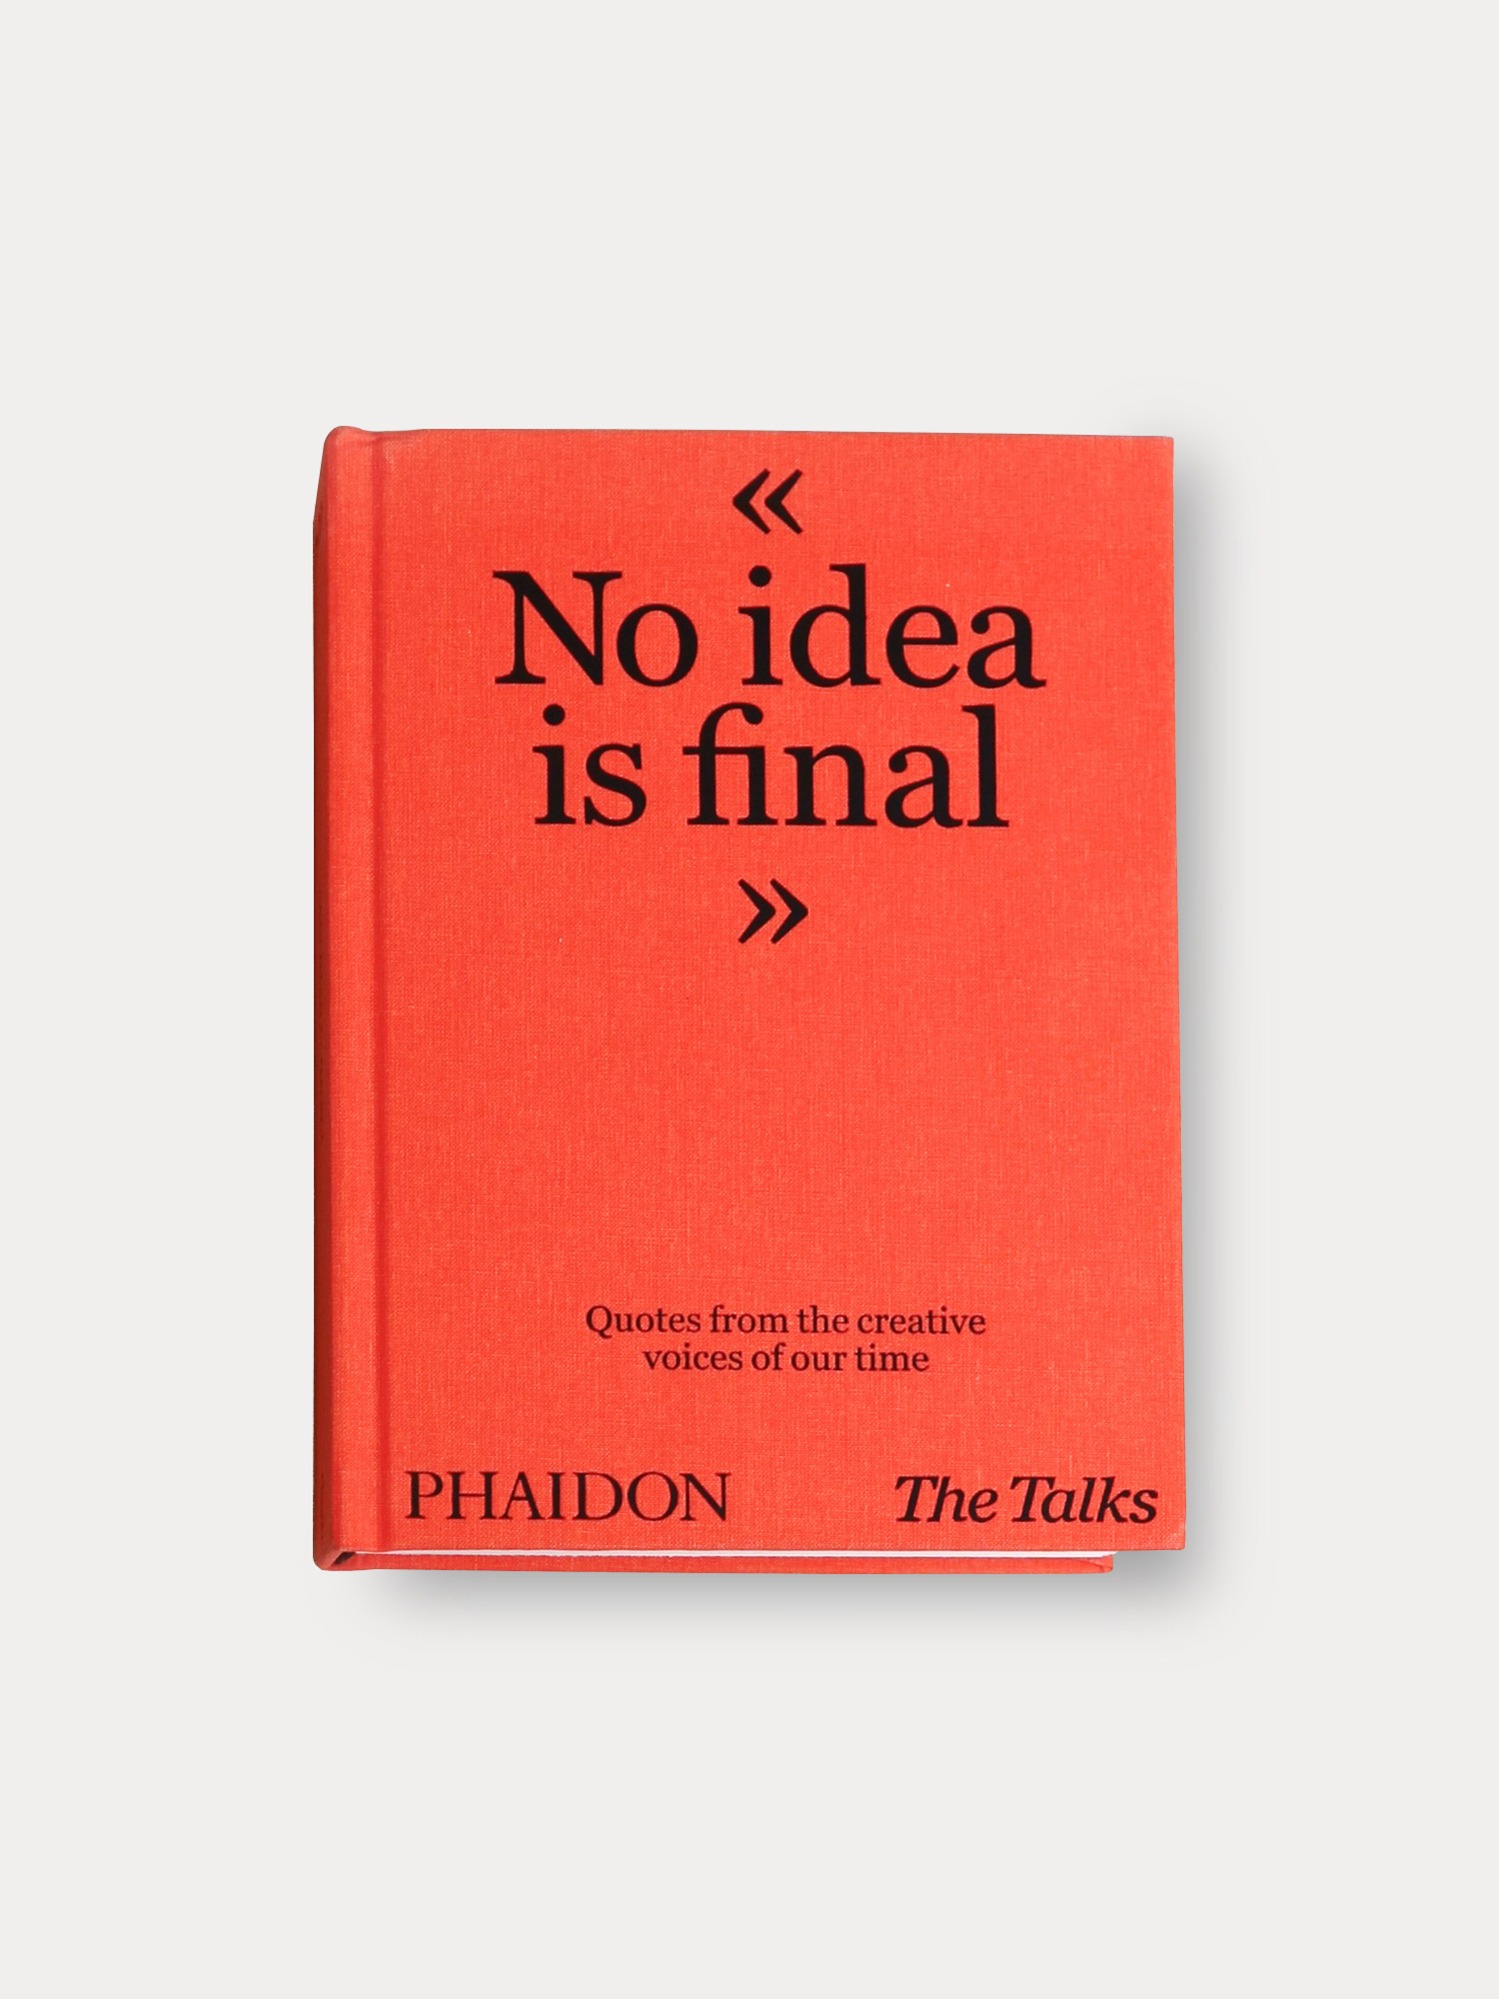 No idea is final: Quotes from the creative voices of our time